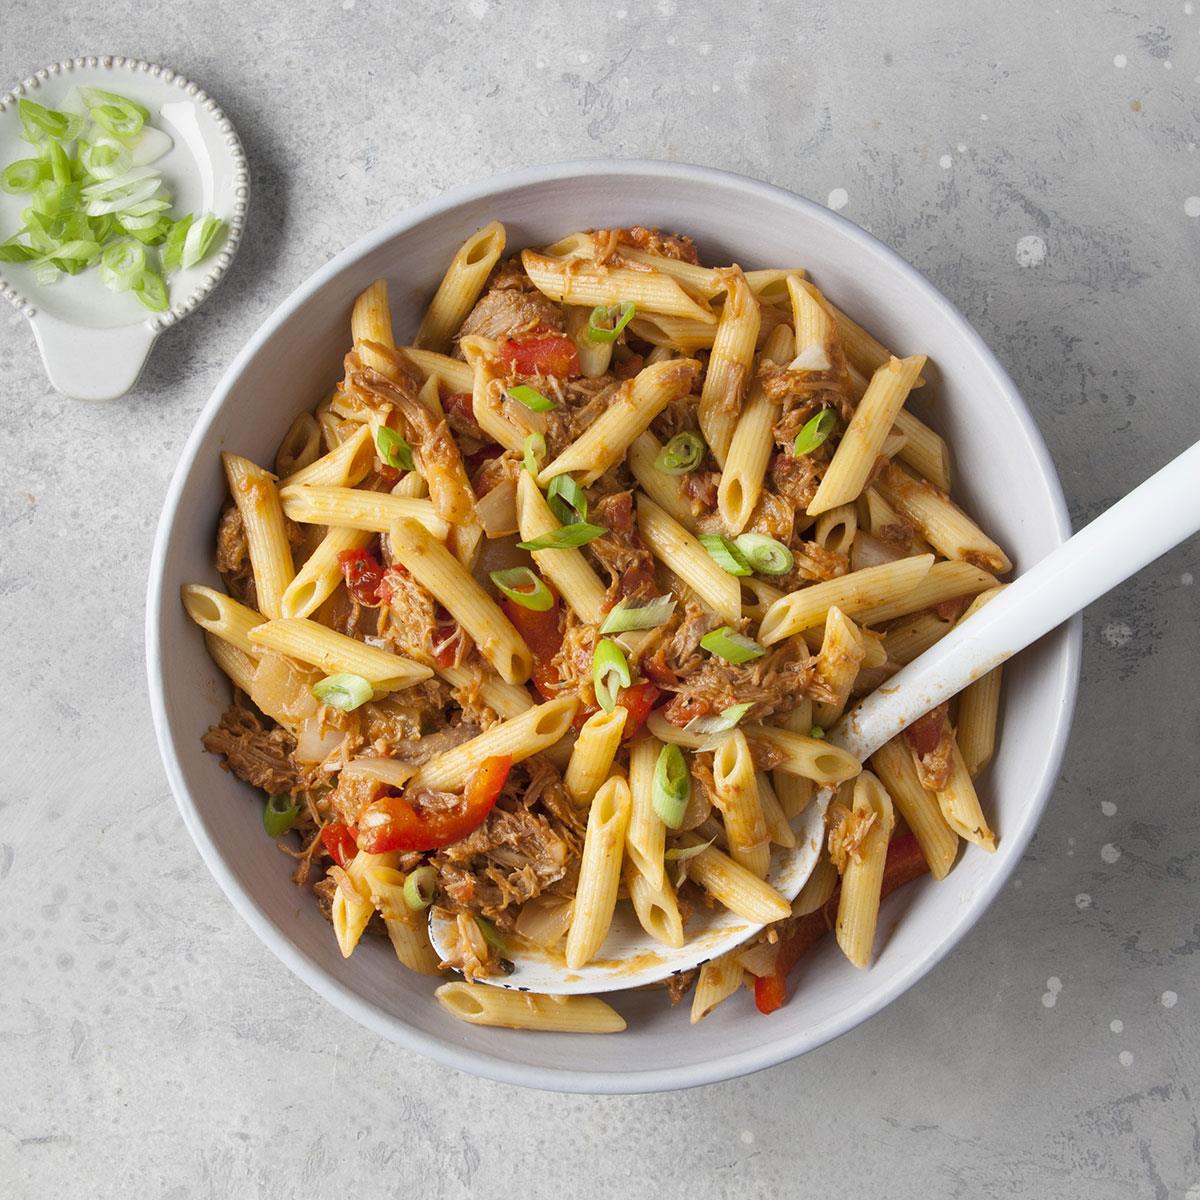 Barbecue Pork and Penne Skillet Recipe: How to Make It